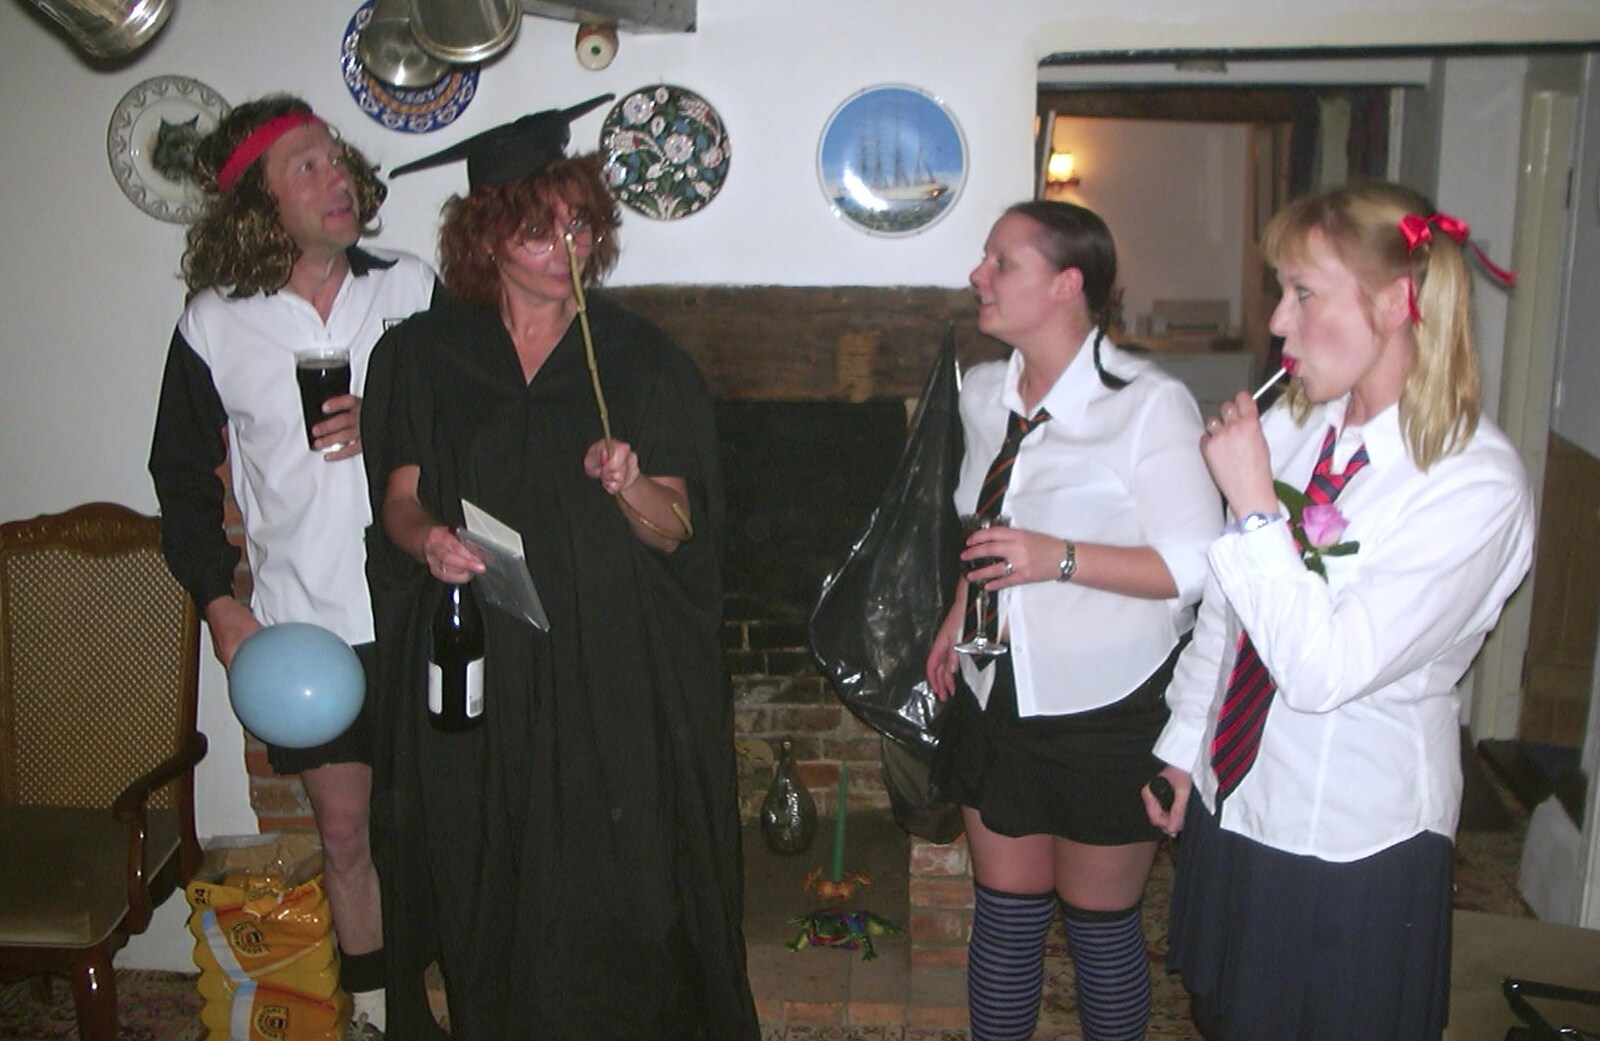 Anne arrives as 'headmaster' from Jenny's School Disco, Thrandeston, Suffolk - 17th May 2003